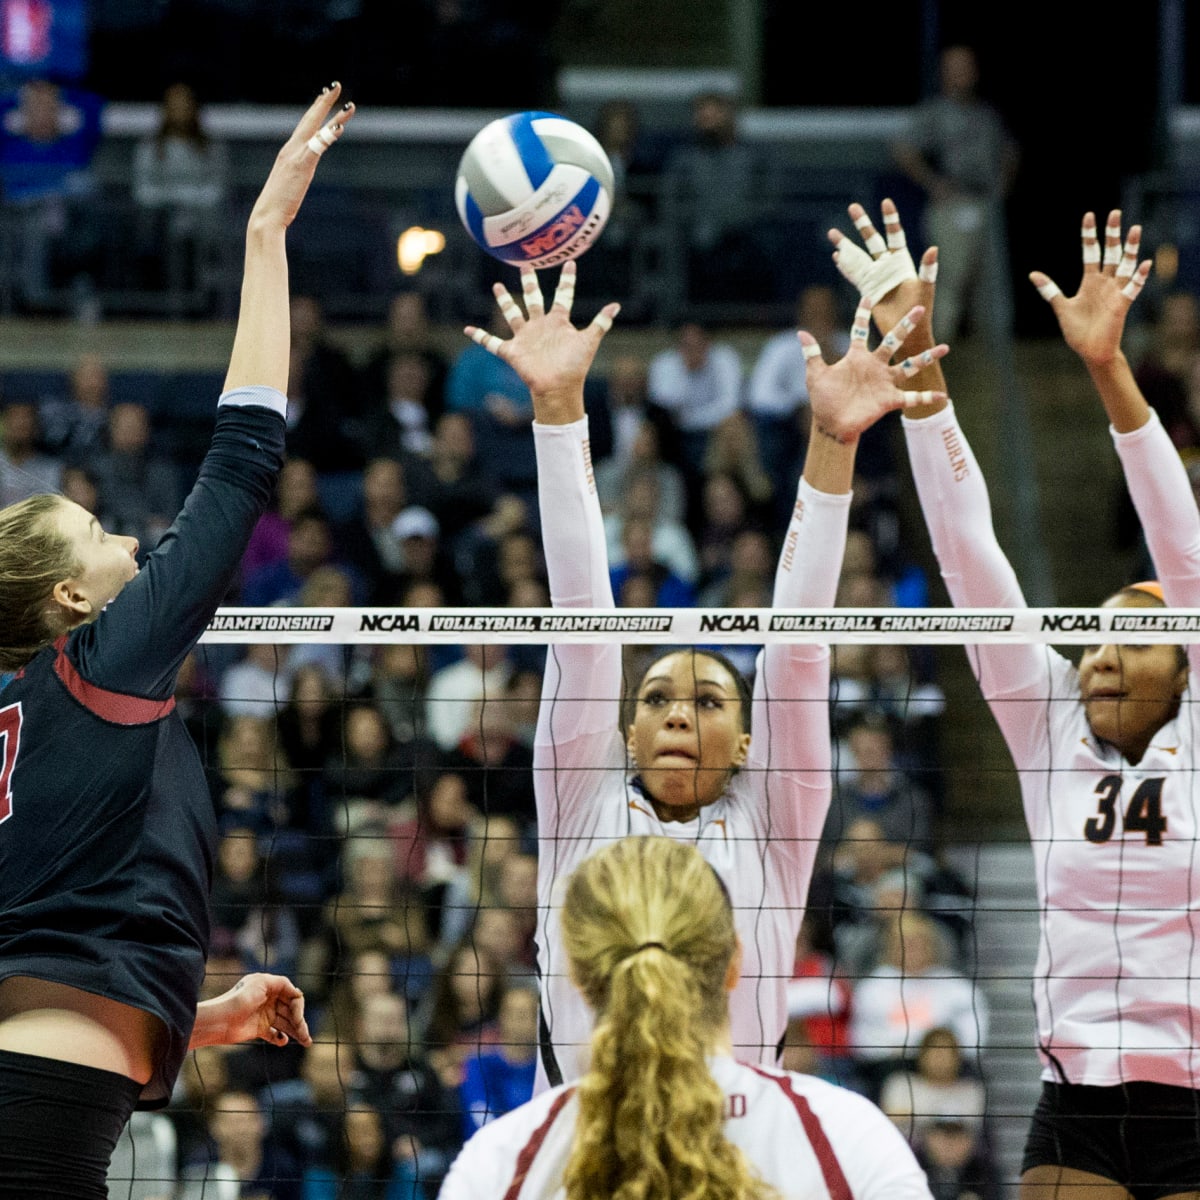 Colorado State at Boise State Free Live Stream Volleyball - How to Watch and Stream Major League and College Sports